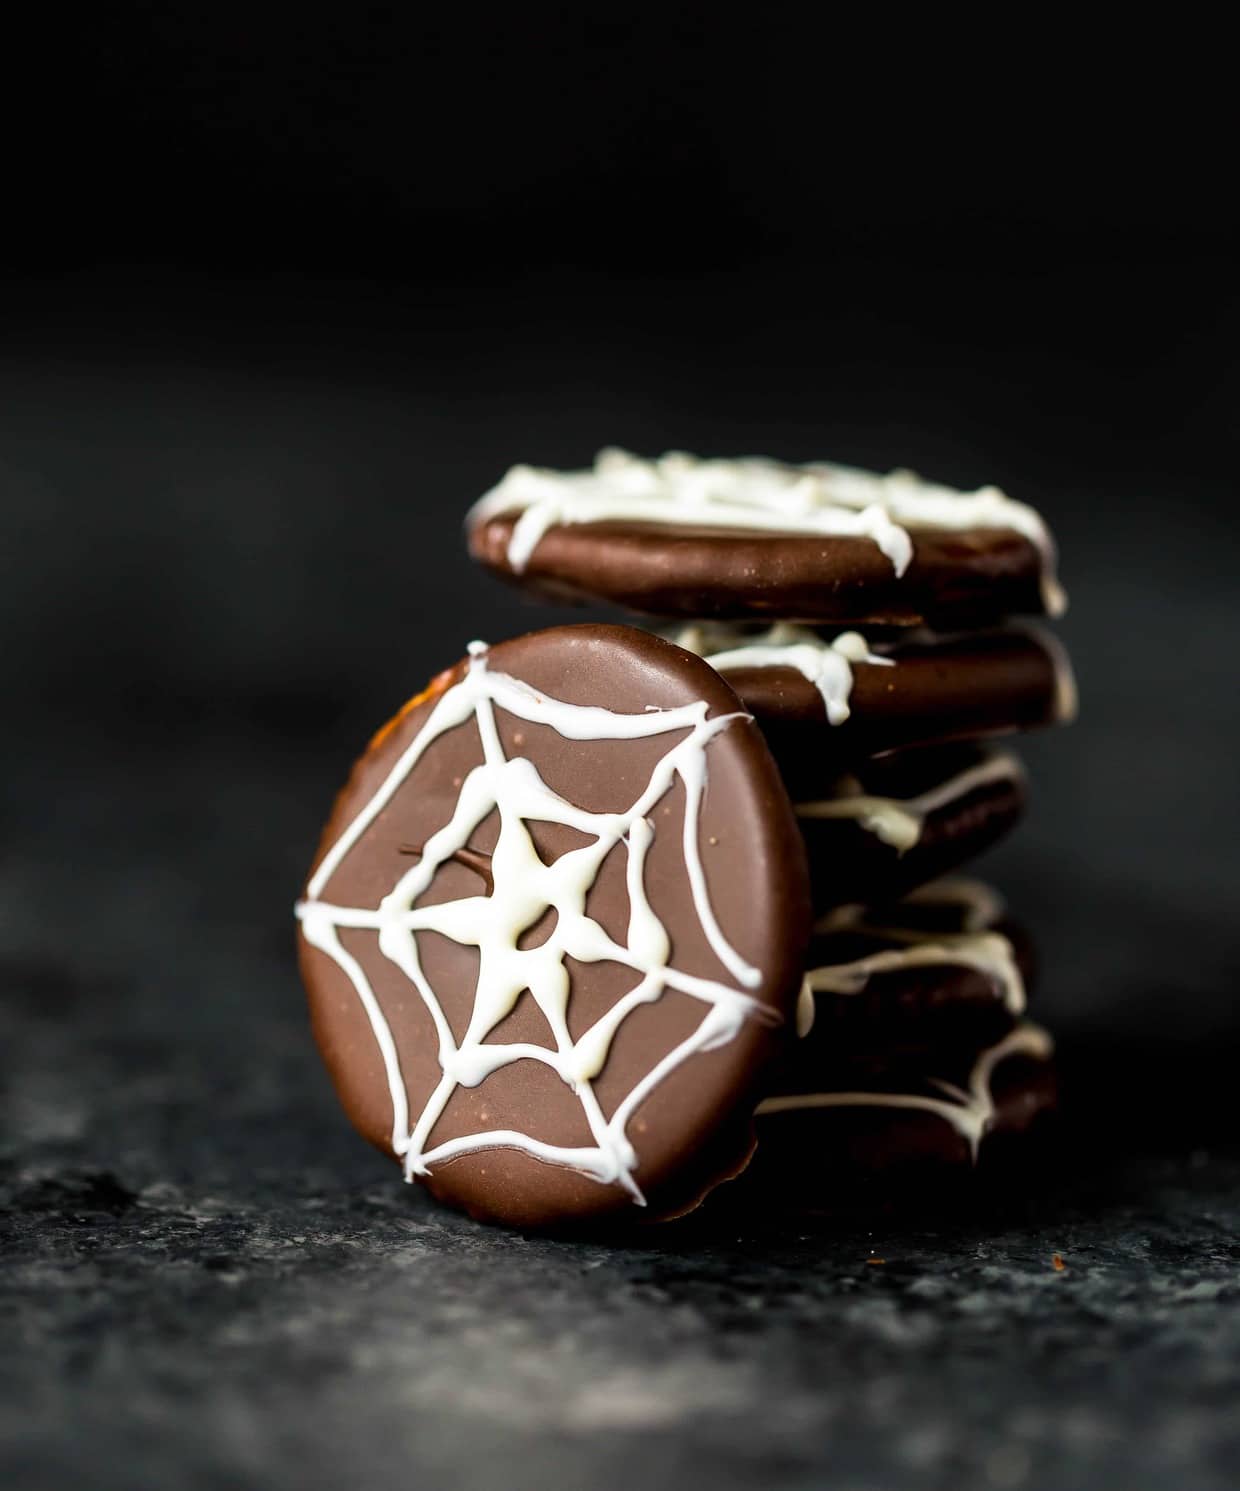 Chocolate covered ritz crackers featuring a white chocolate spider web design on top of cracker.